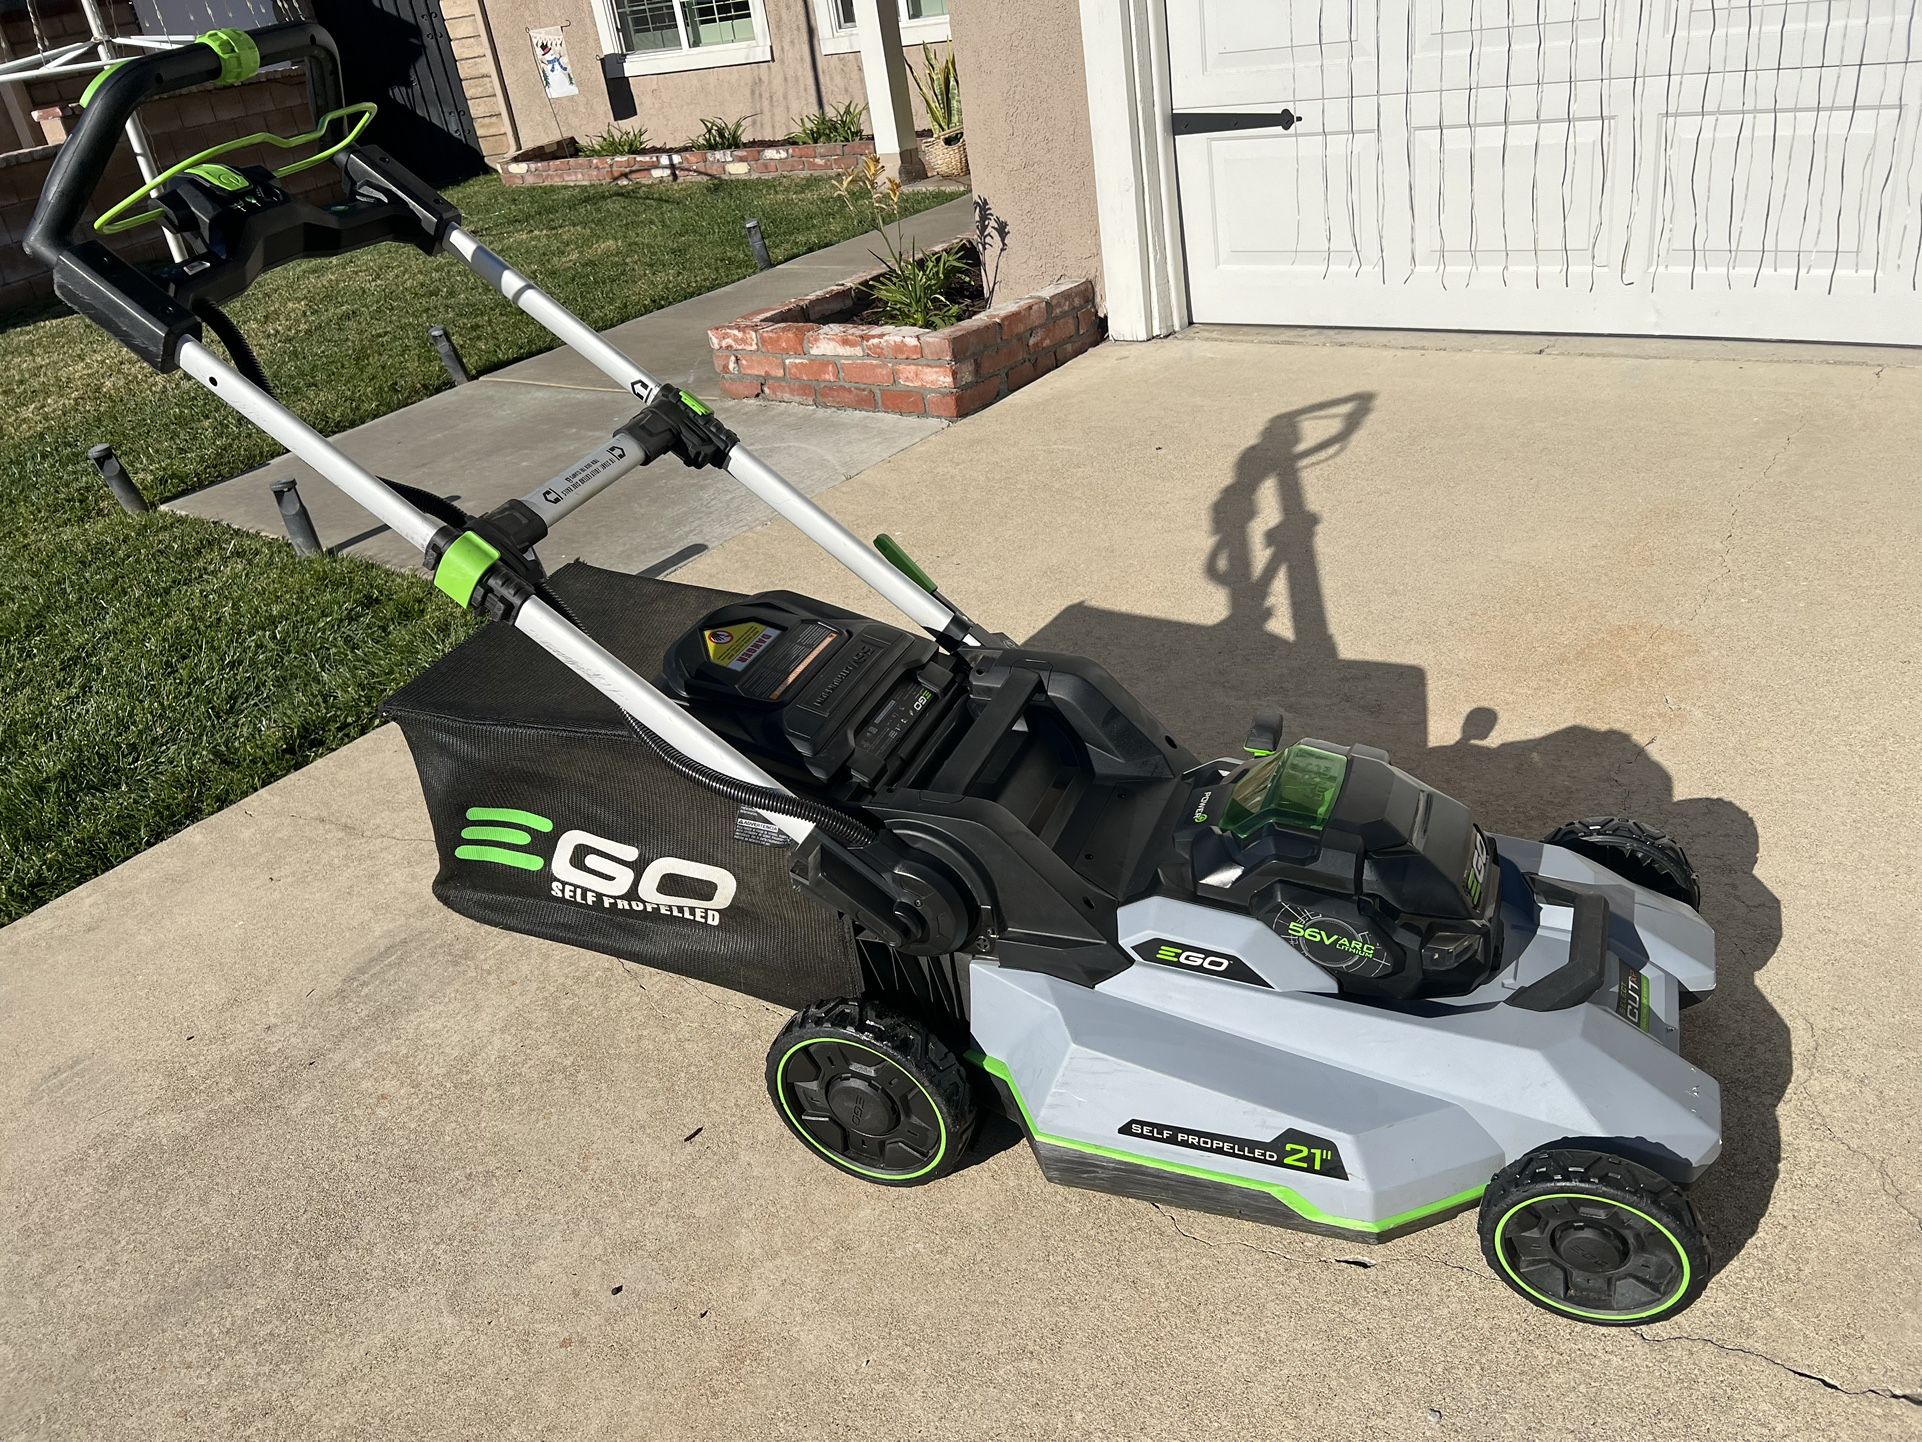 Ego Lm2156sp Select Cut 56in Self Propelled Electric Lawn Mower 10ah Battery And Rapid Charger